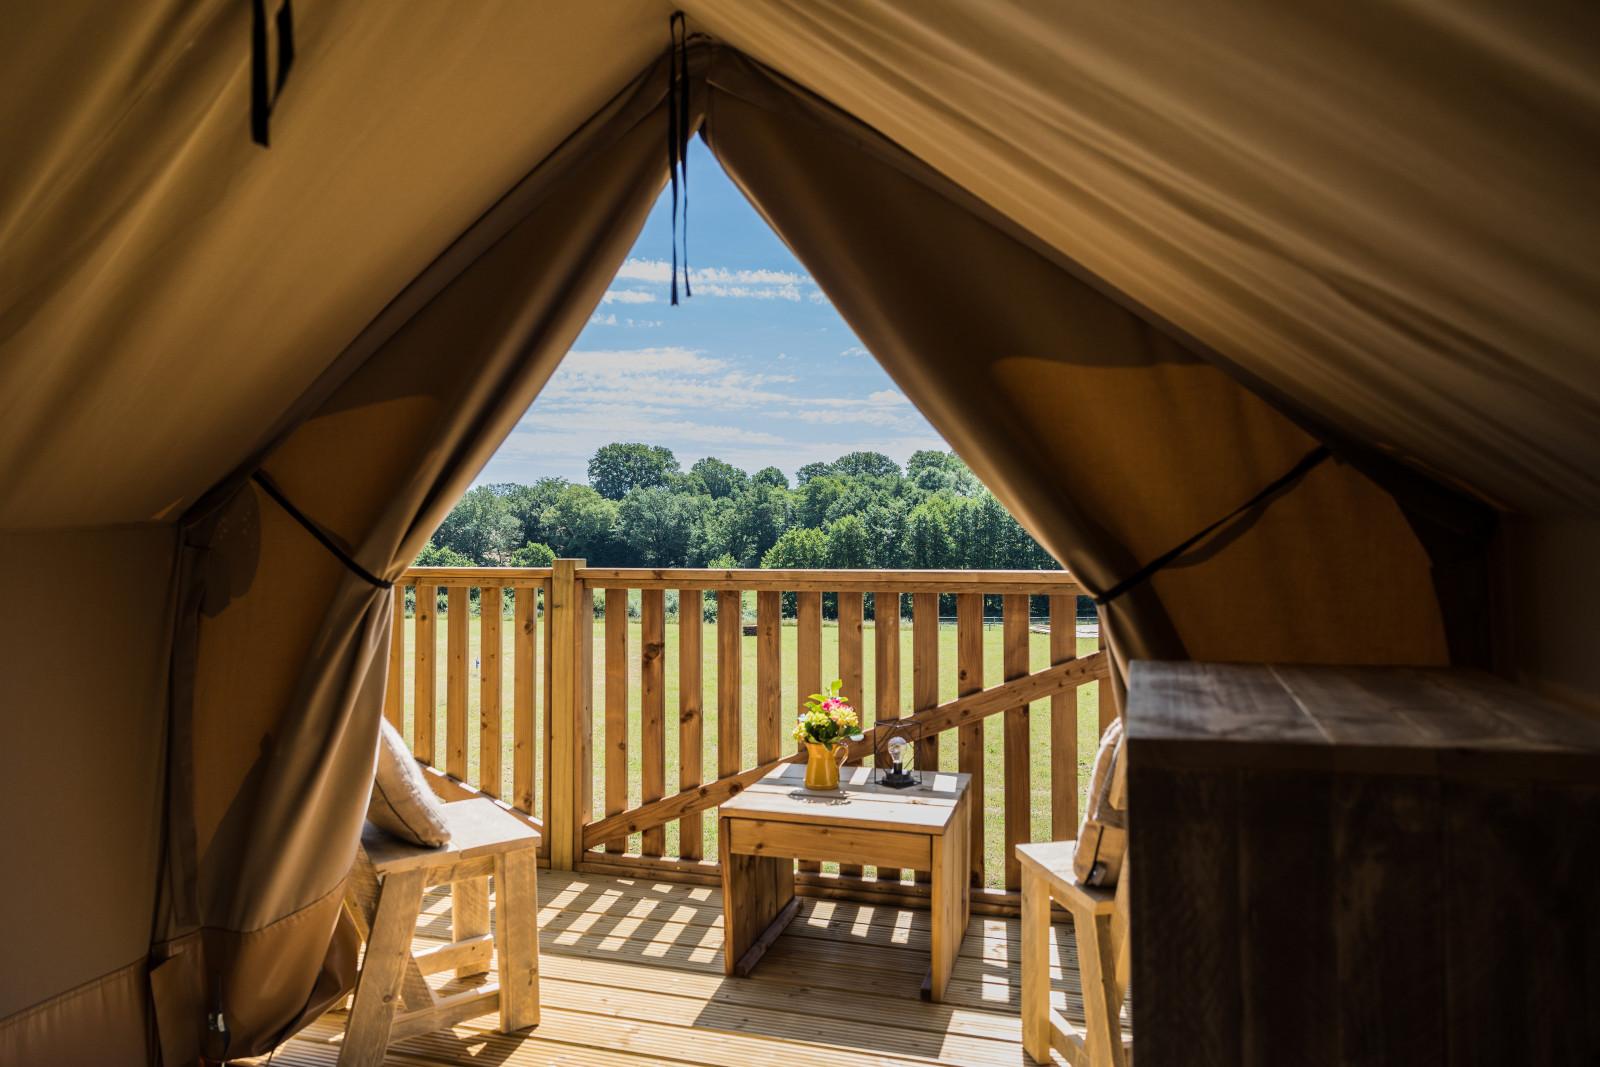 Nature, comfort and freedom in Glampinglodge 'Papillon' 